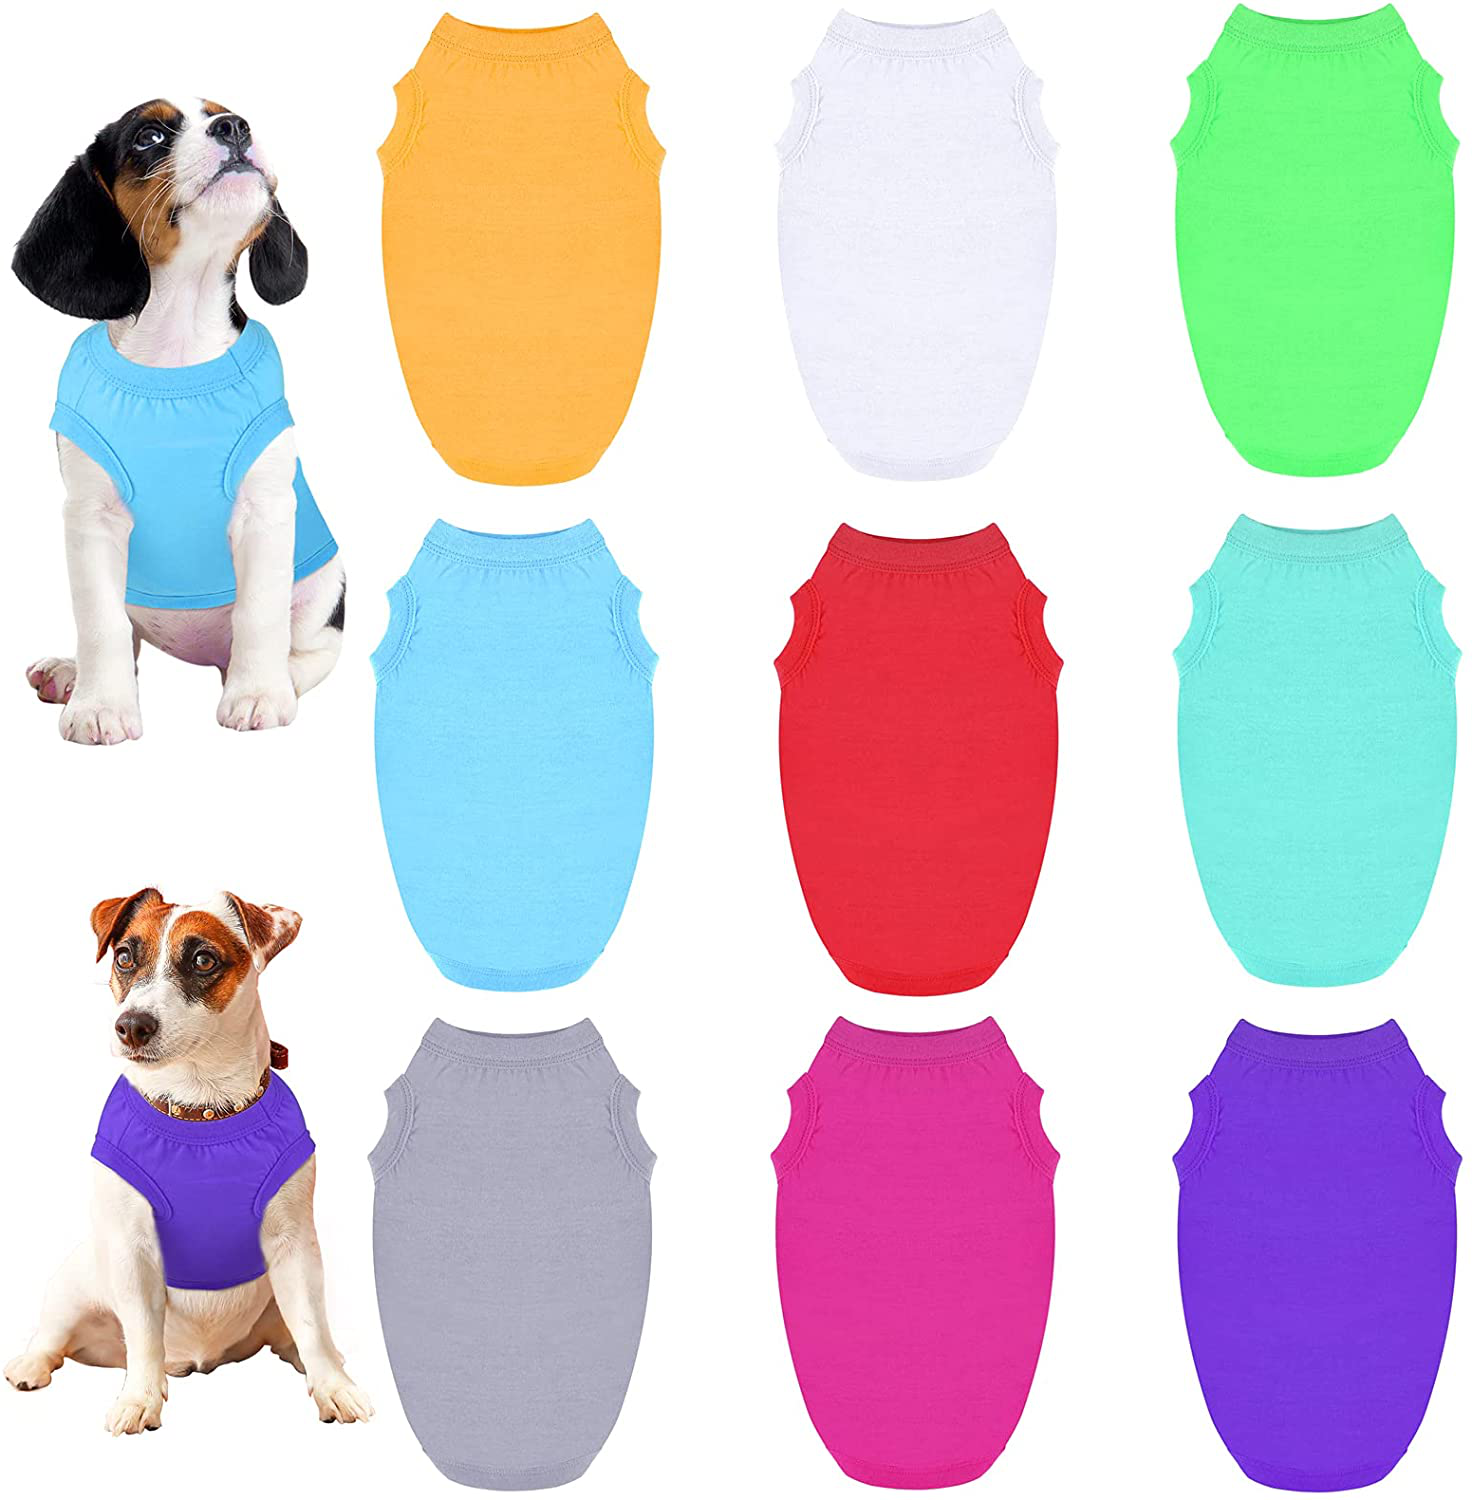 URATOT 9 Pack Dog T-Shirt Dog Plain Shirts Pet Blank Clothes Cotton Puppy Clothes Mixed Colors Pet Apparel Dog Cat Pet Clothes for Spring Summer, Large Animals & Pet Supplies > Pet Supplies > Dog Supplies > Dog Apparel URATOT White, Grey, Orange, Red, Assorted Colors Large 